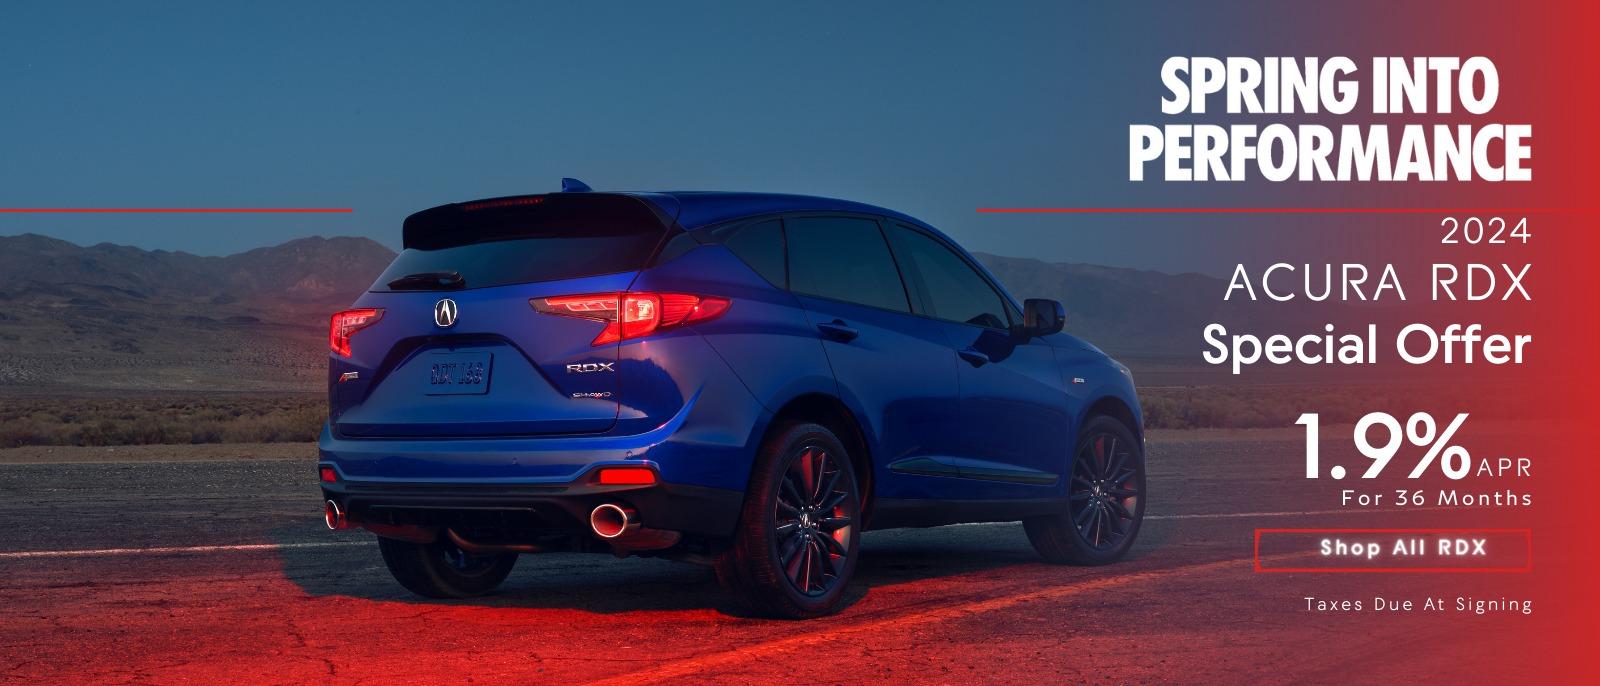 2024 Acura RDX Special APR 1.9%* For 36 months